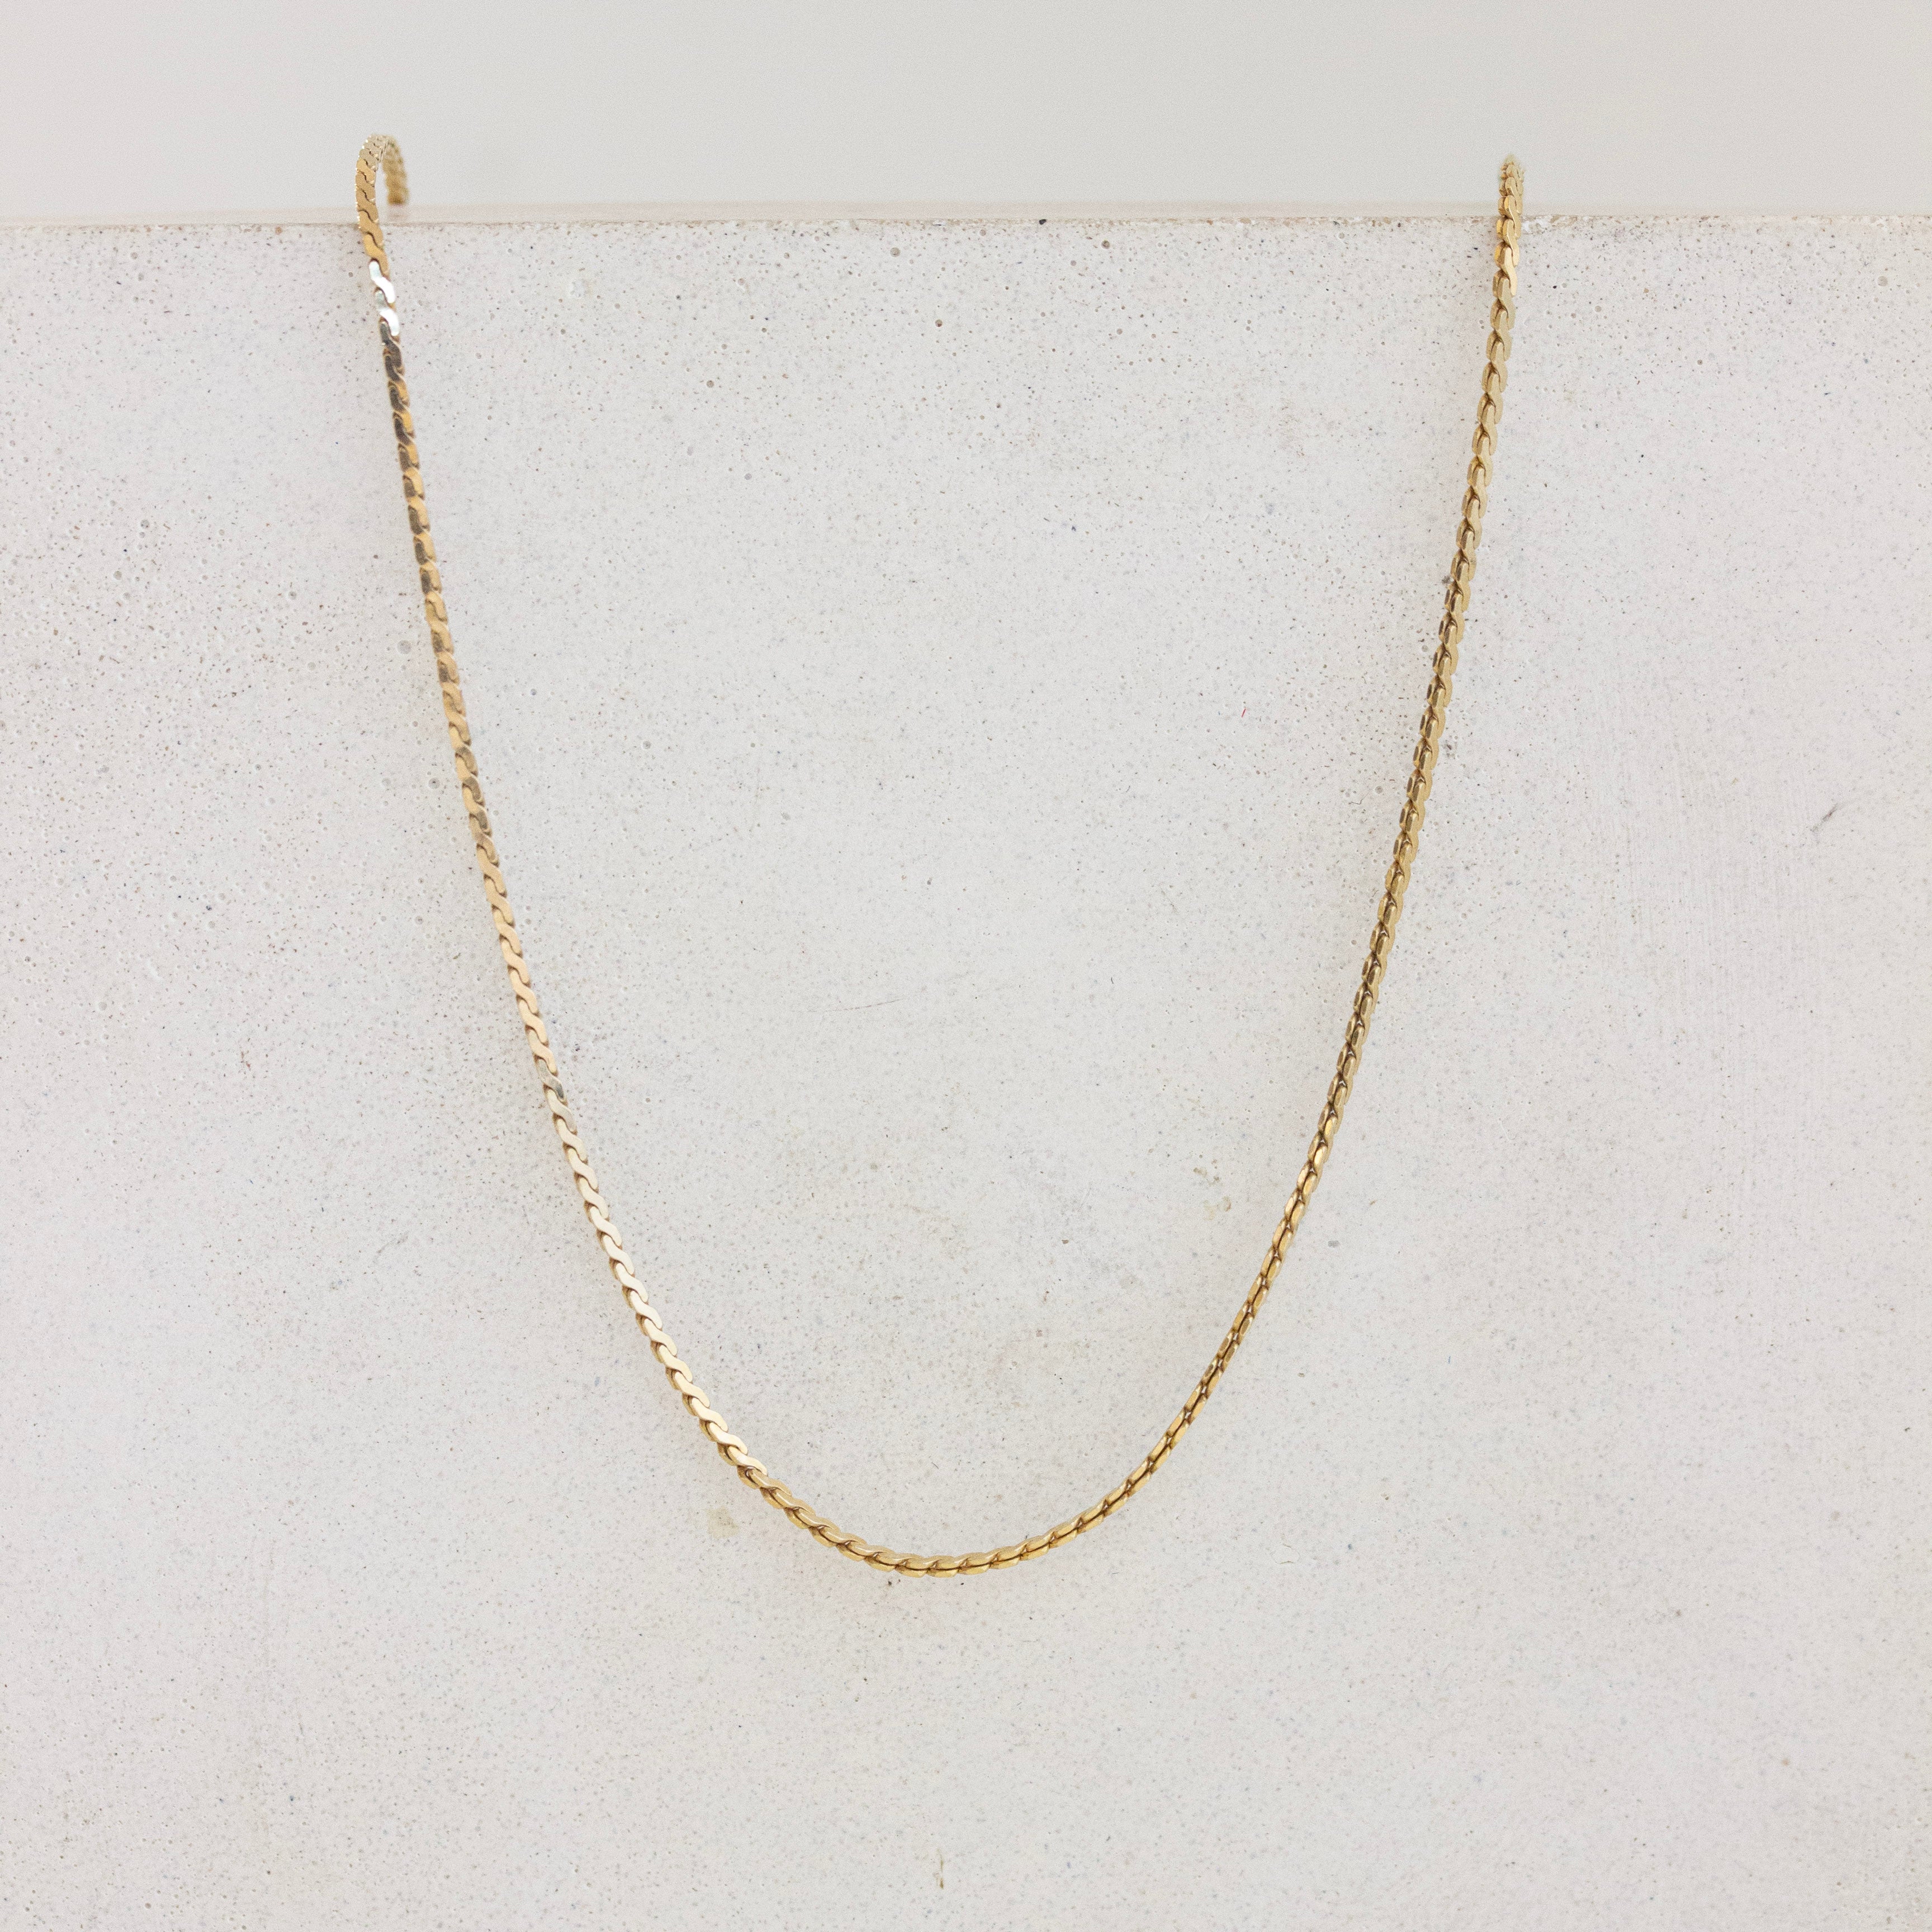 14K Gold Serpentine Chain, Gold Necklace, S Link Chain, Pendant Chain,  Layering Necklace, 15 Inch Chain JH6Z3M8T - Etsy